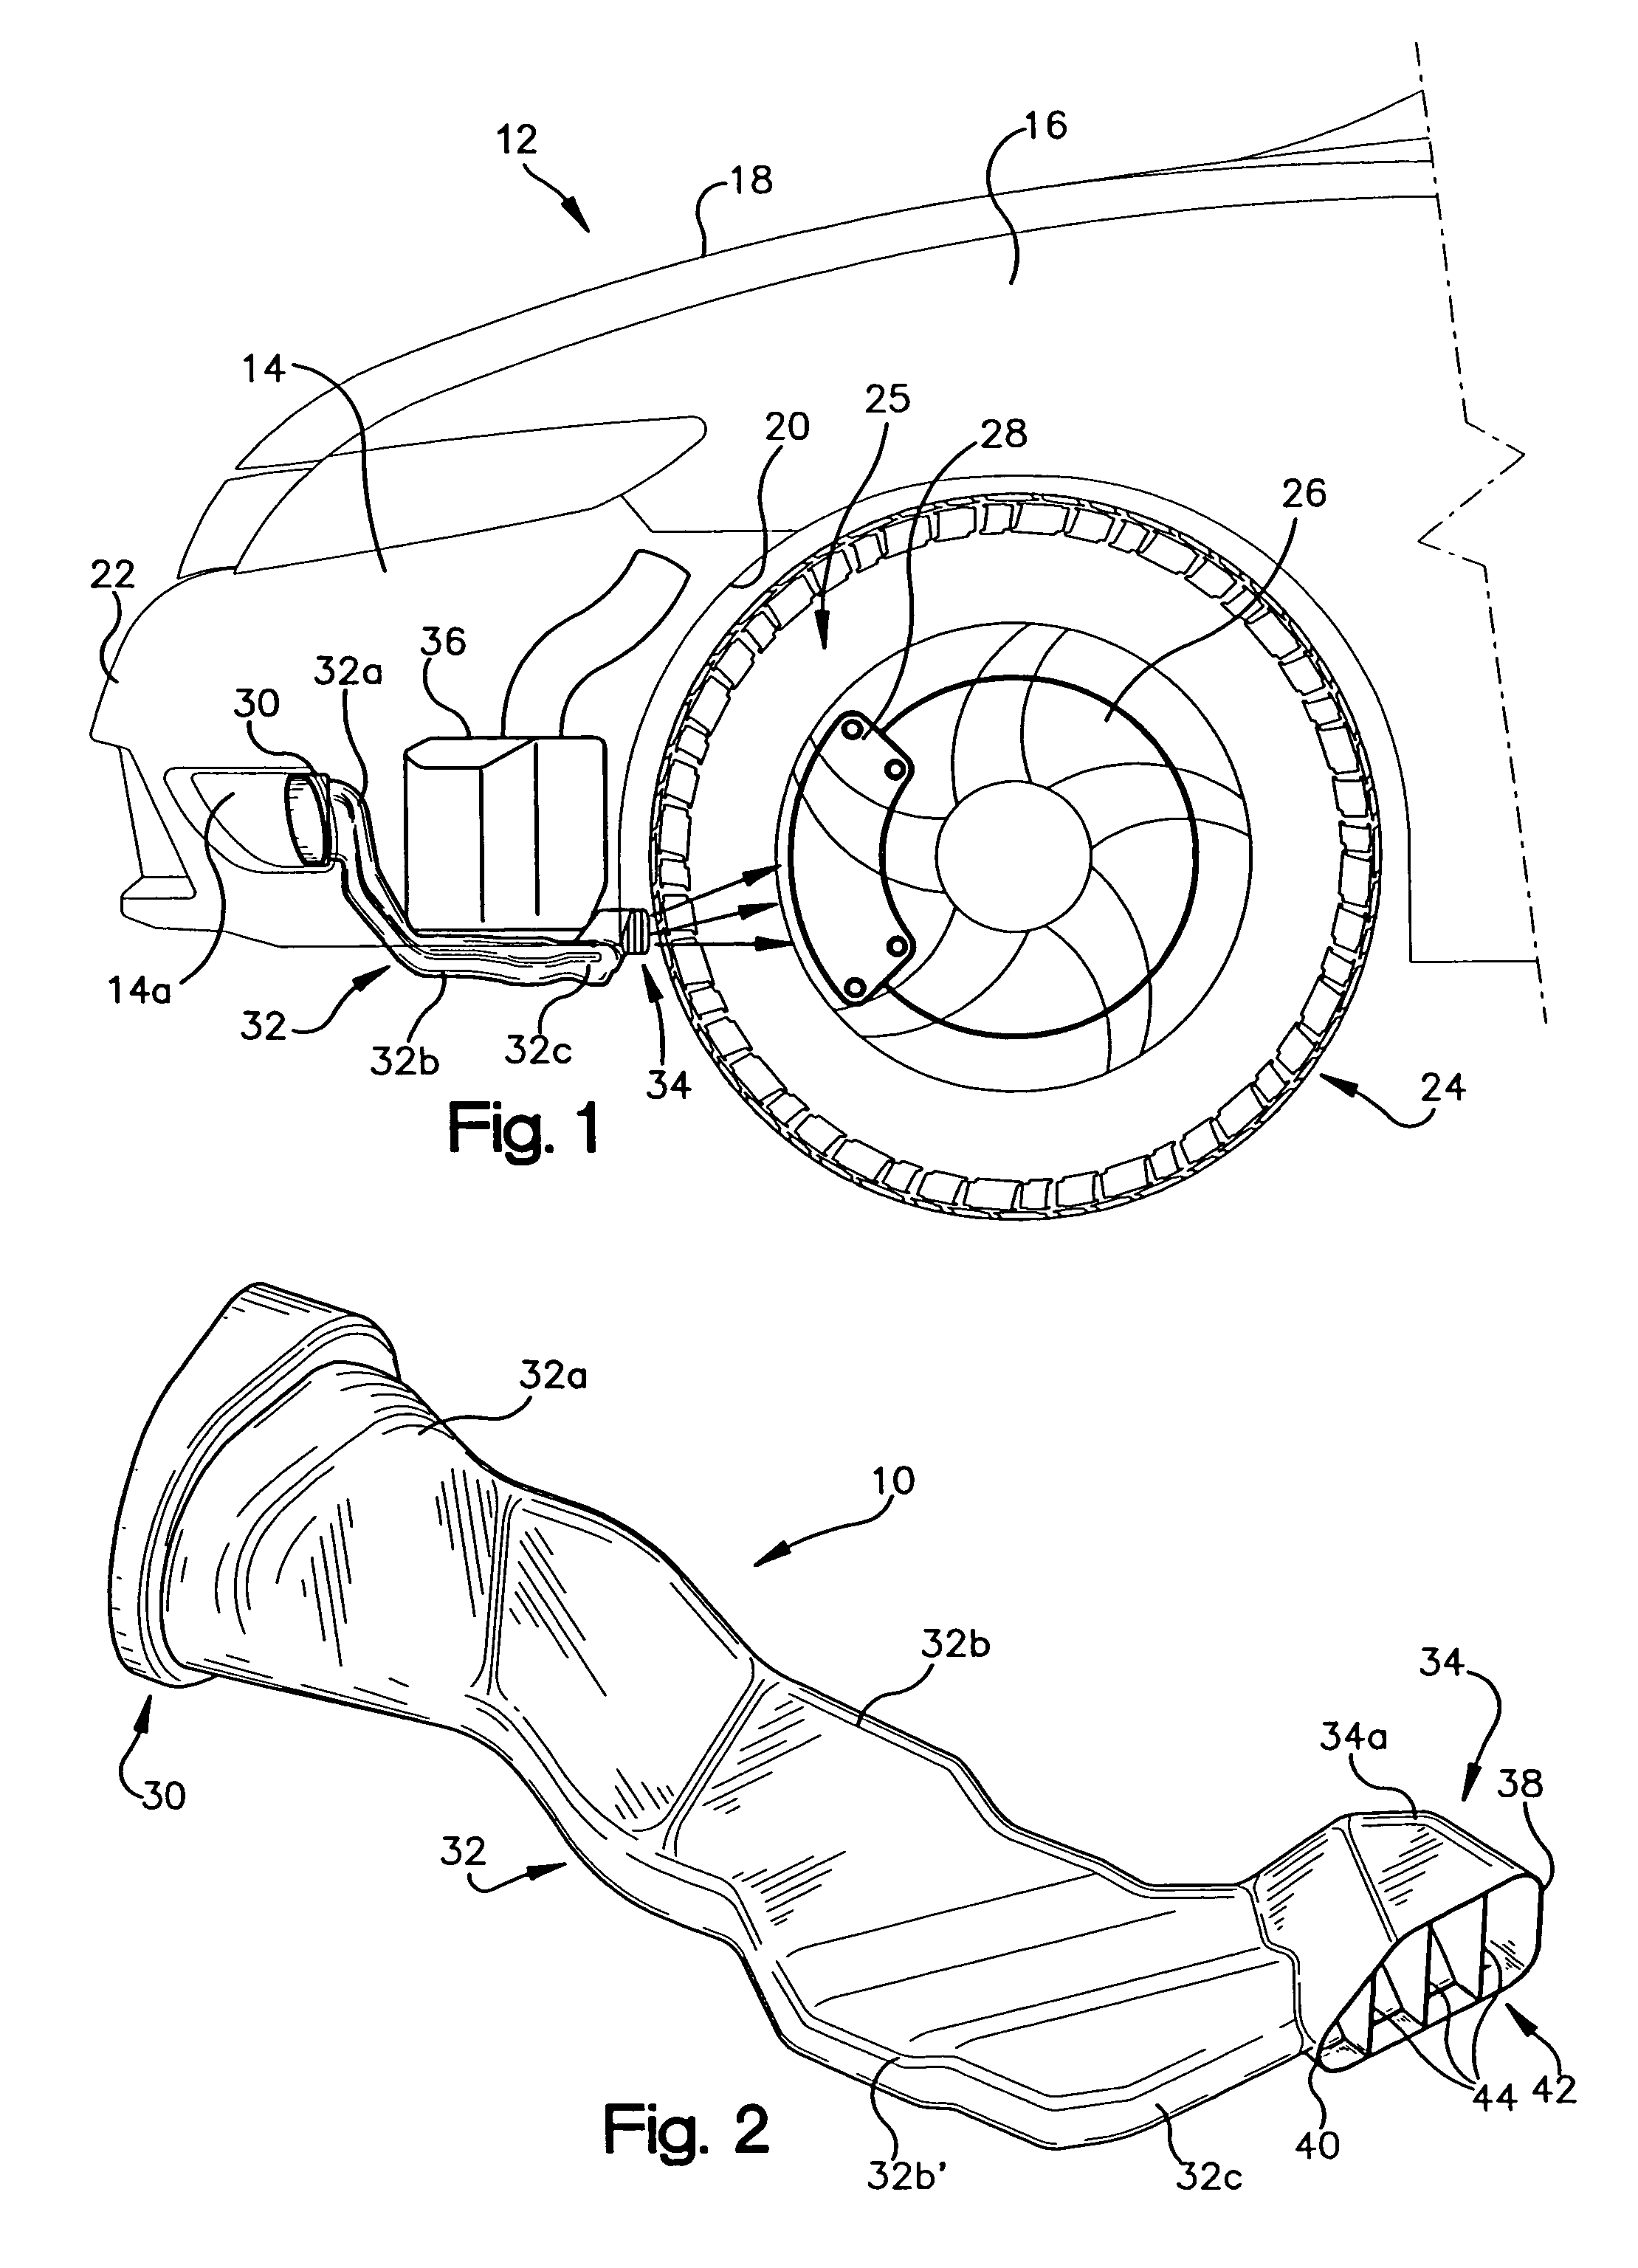 Finned brake duct to divert cooling air to a vehicle brake system